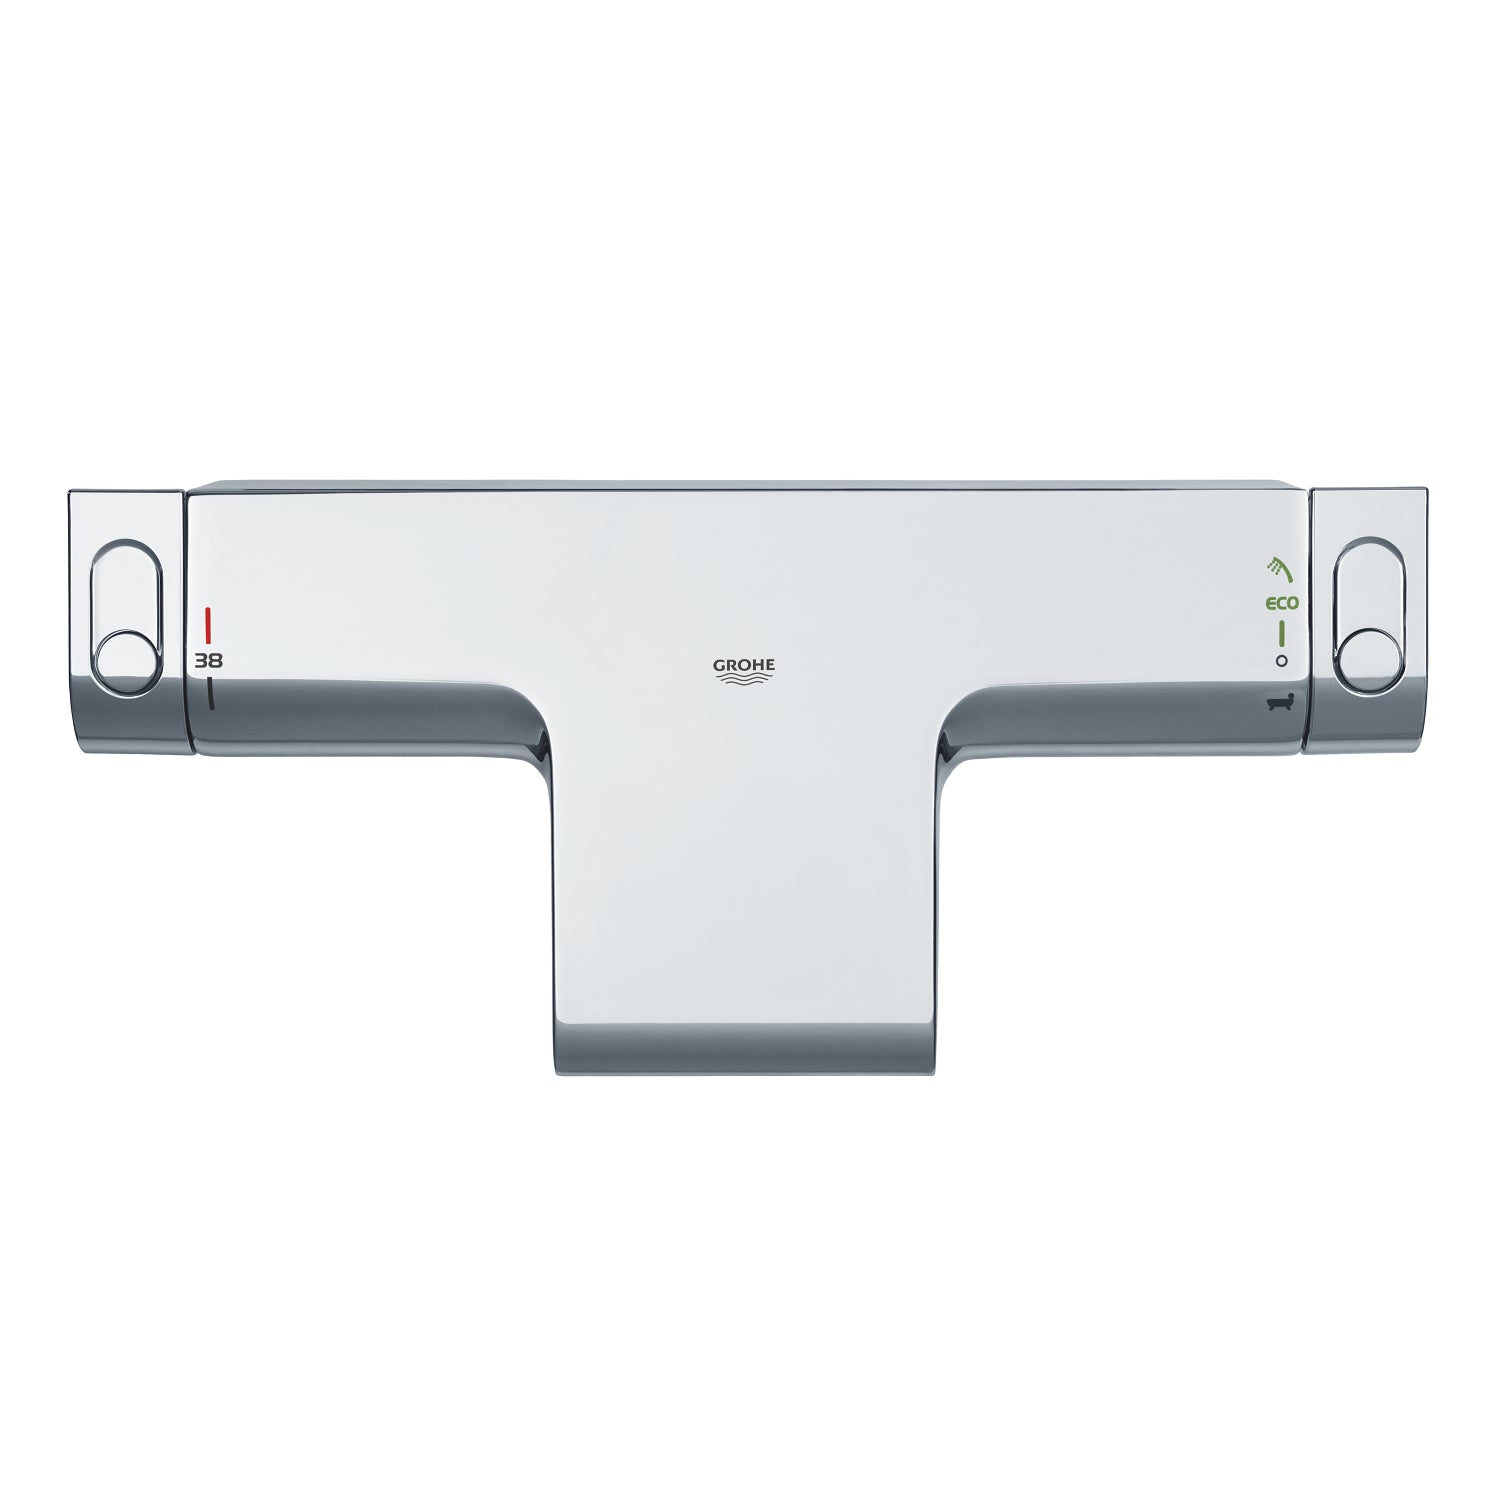 Grohe Wall Mounted Chrome Grohtherm 2000 Thermostatic mixe – Letta London